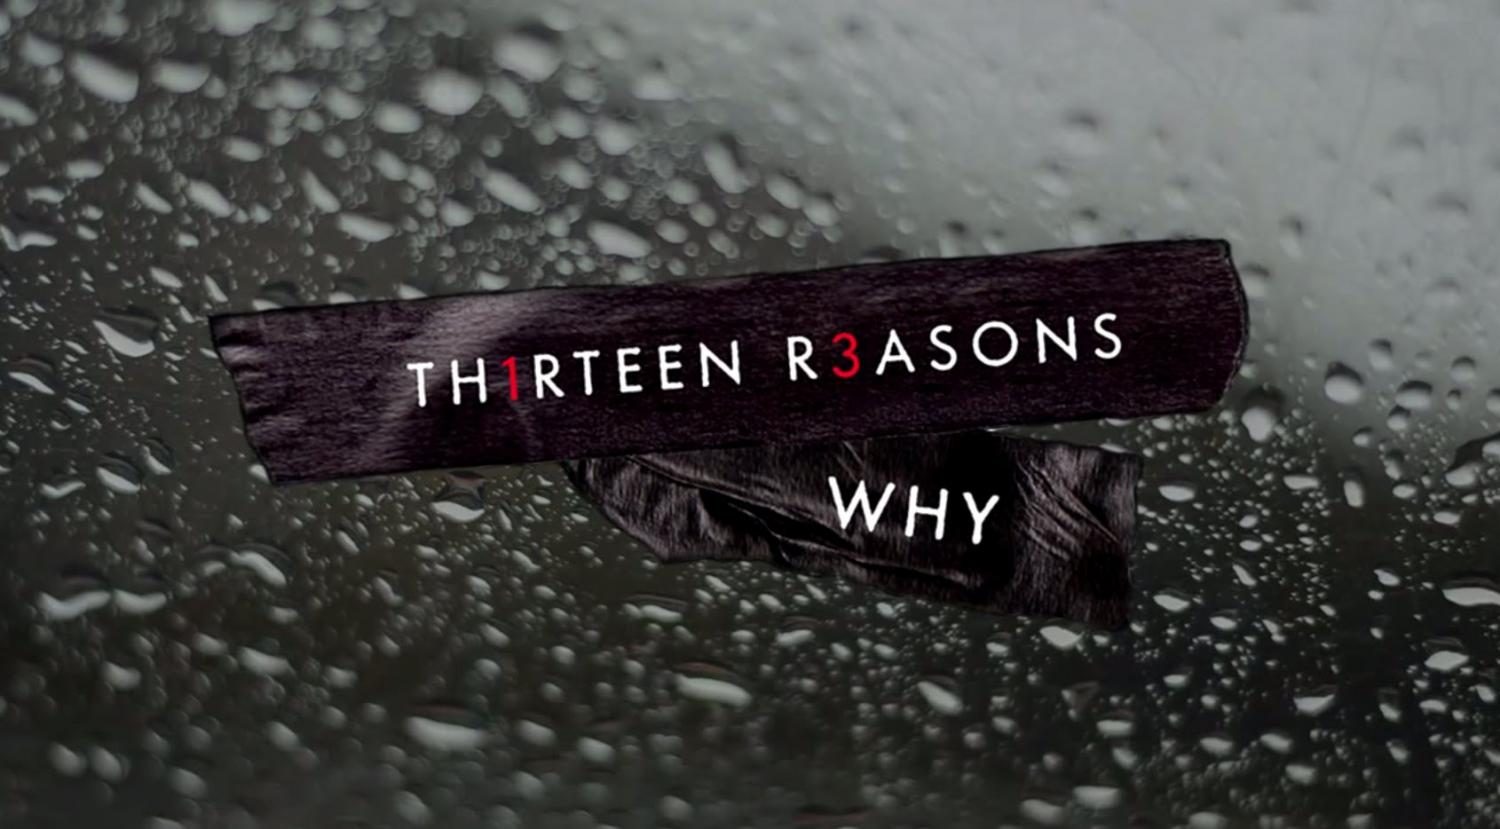 13 Reasons Why brings attention to teen suicide